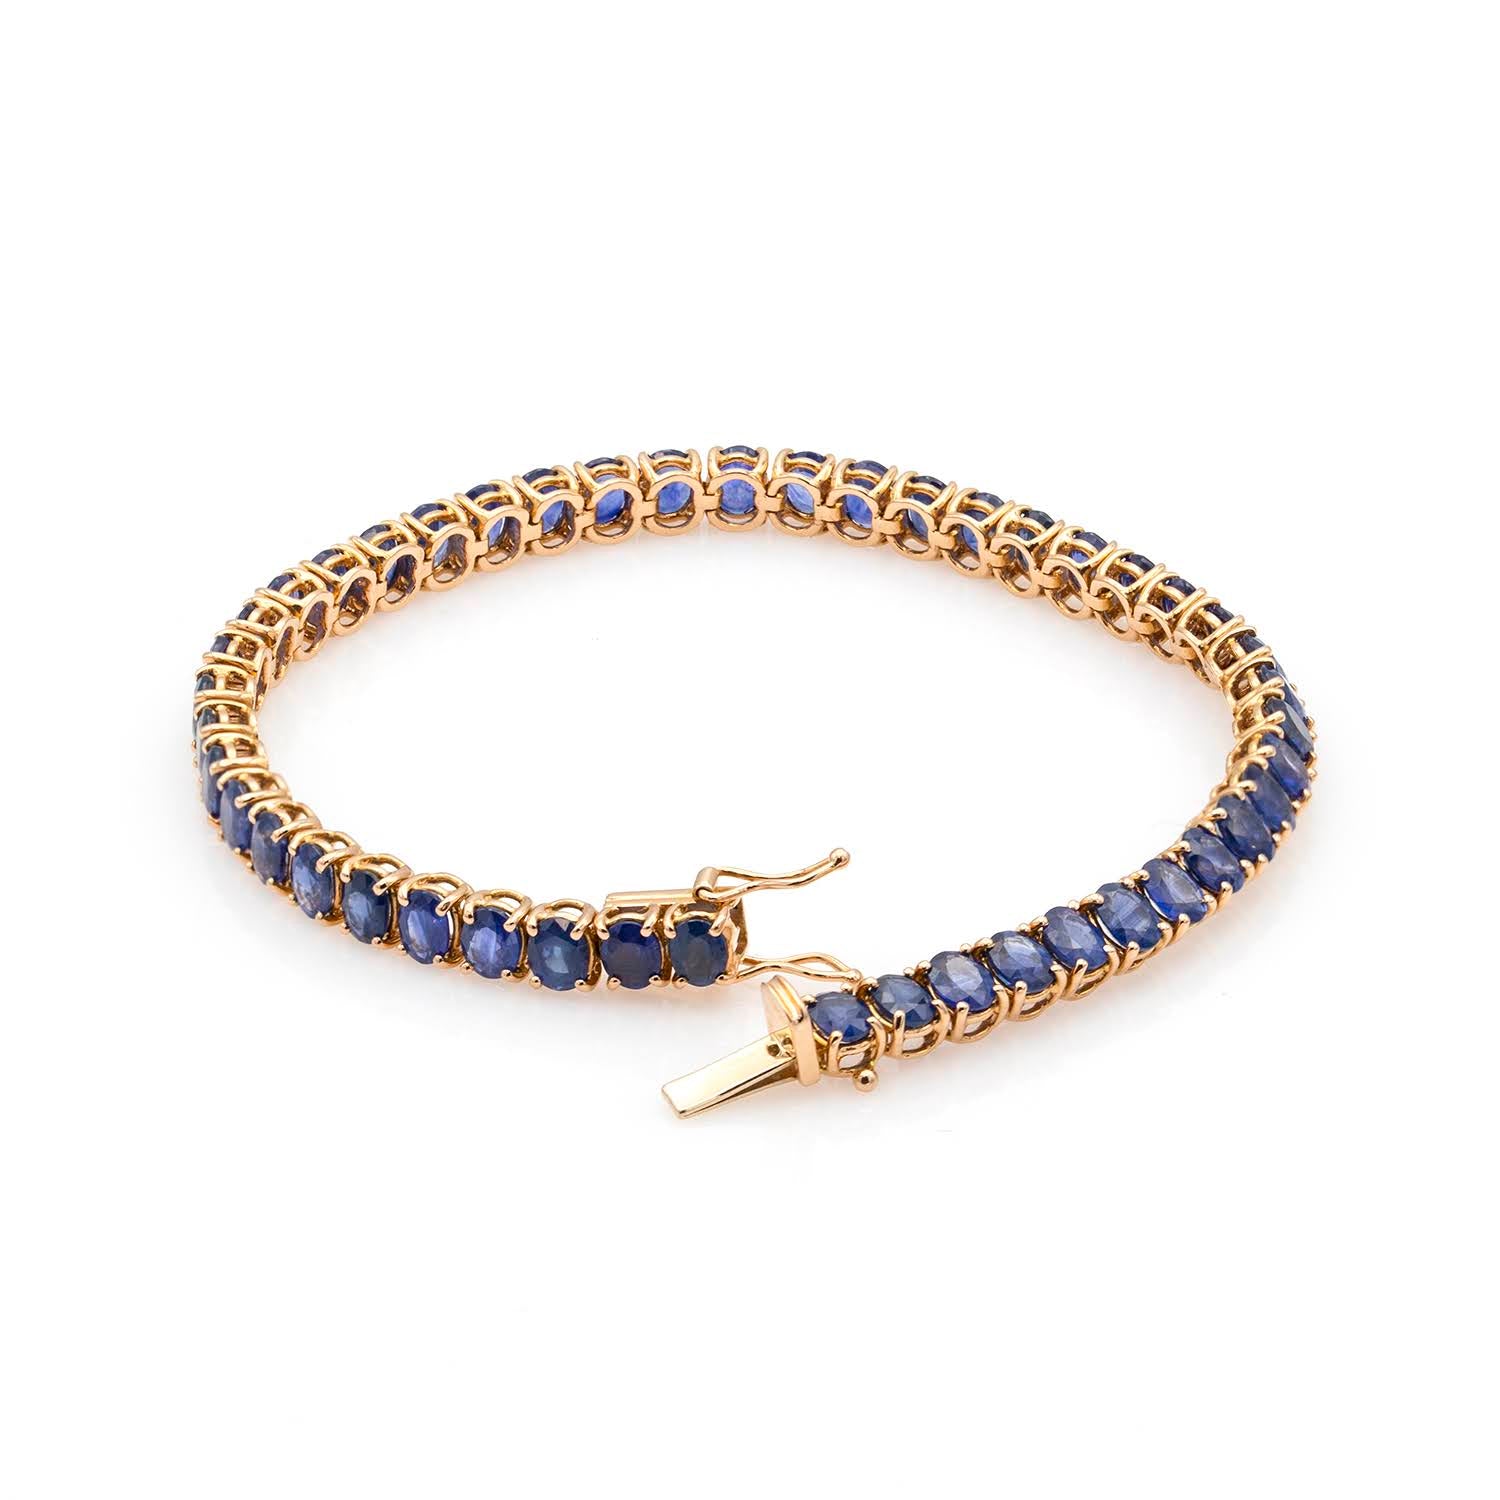 Oval Cut Sapphire 12.35ct Bracelet – New York Collection